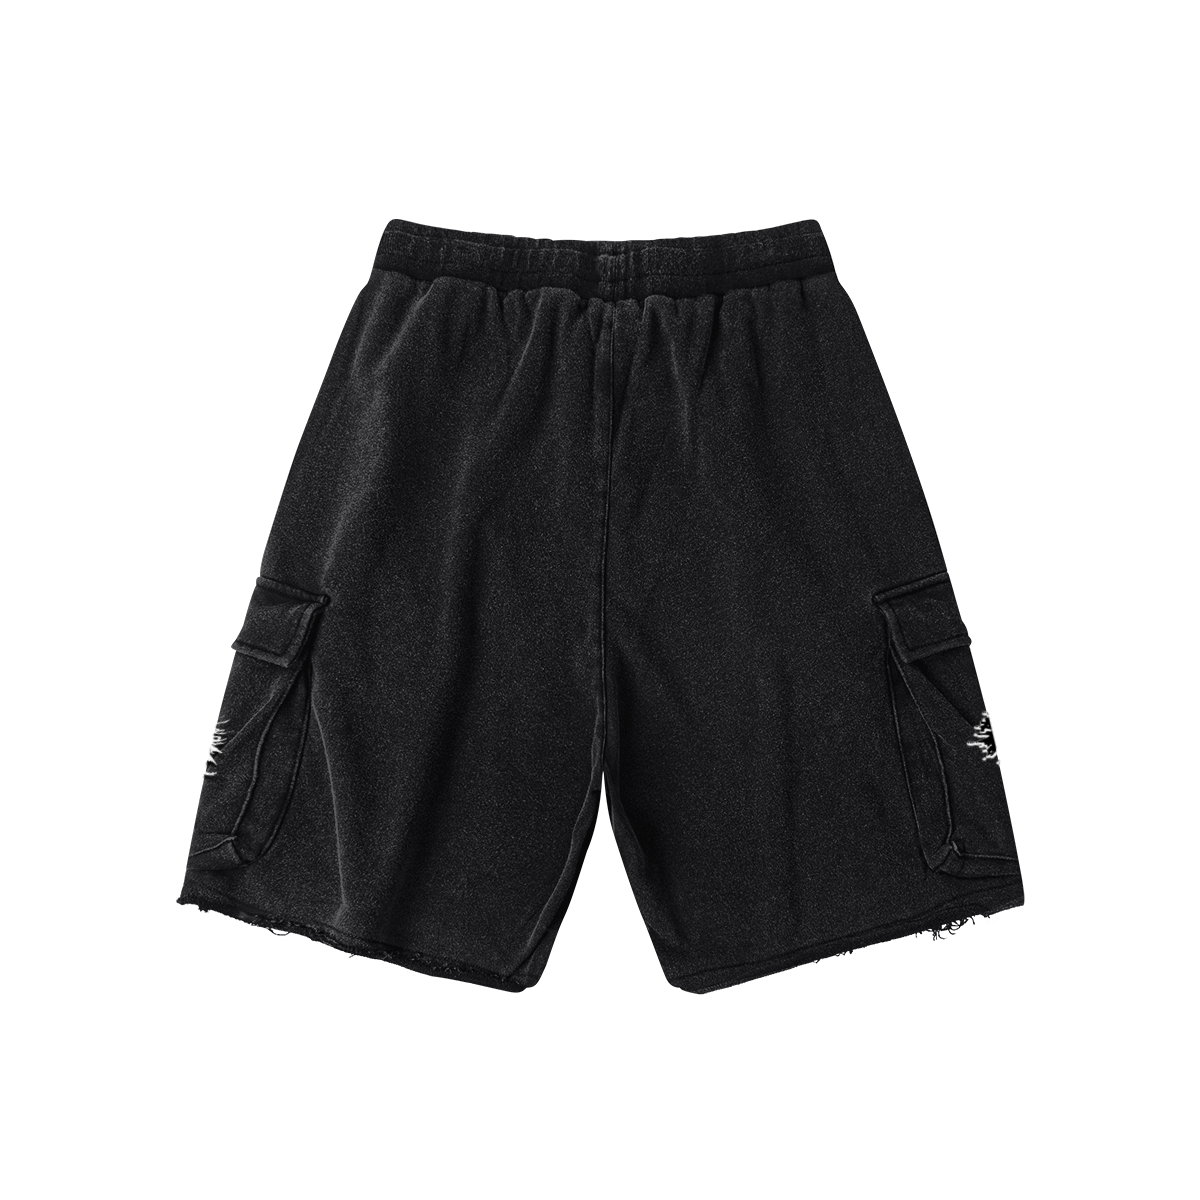 "Awareness" Stay Lifted Shorts